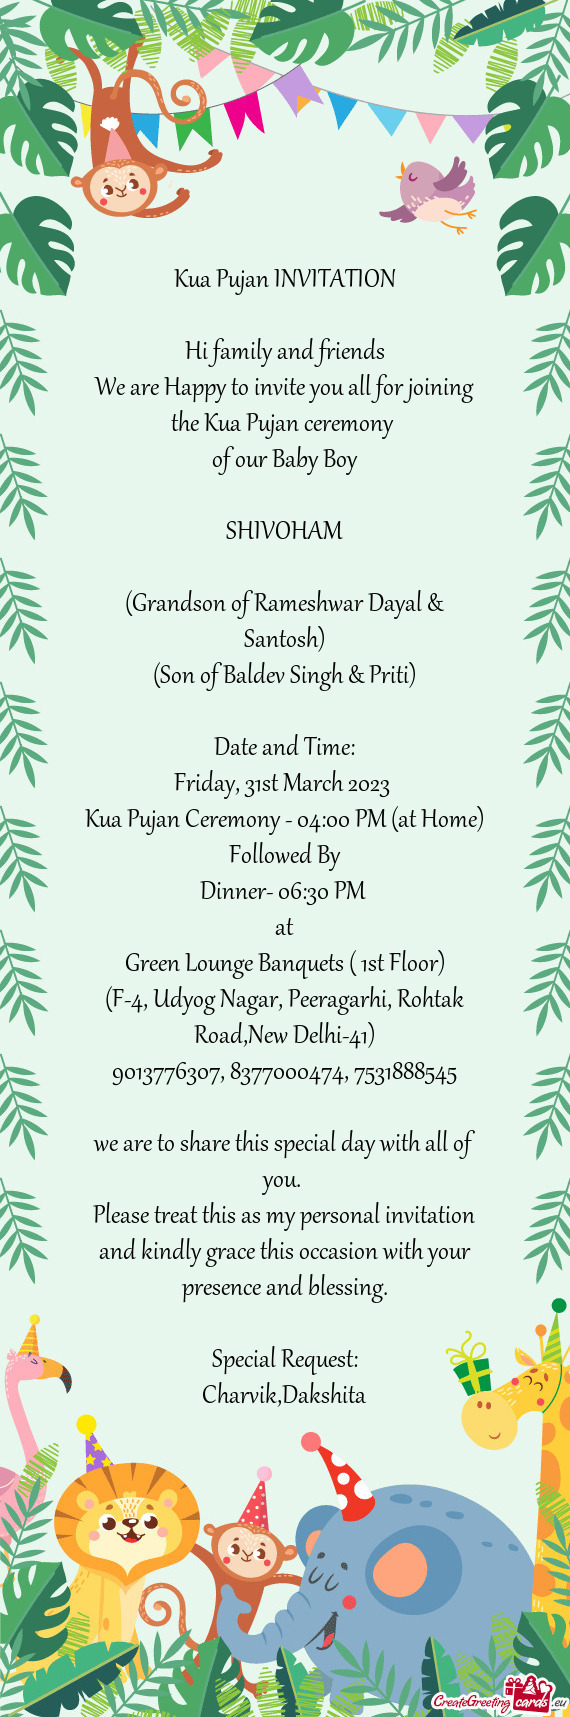 Green Lounge Banquets ( 1st Floor)